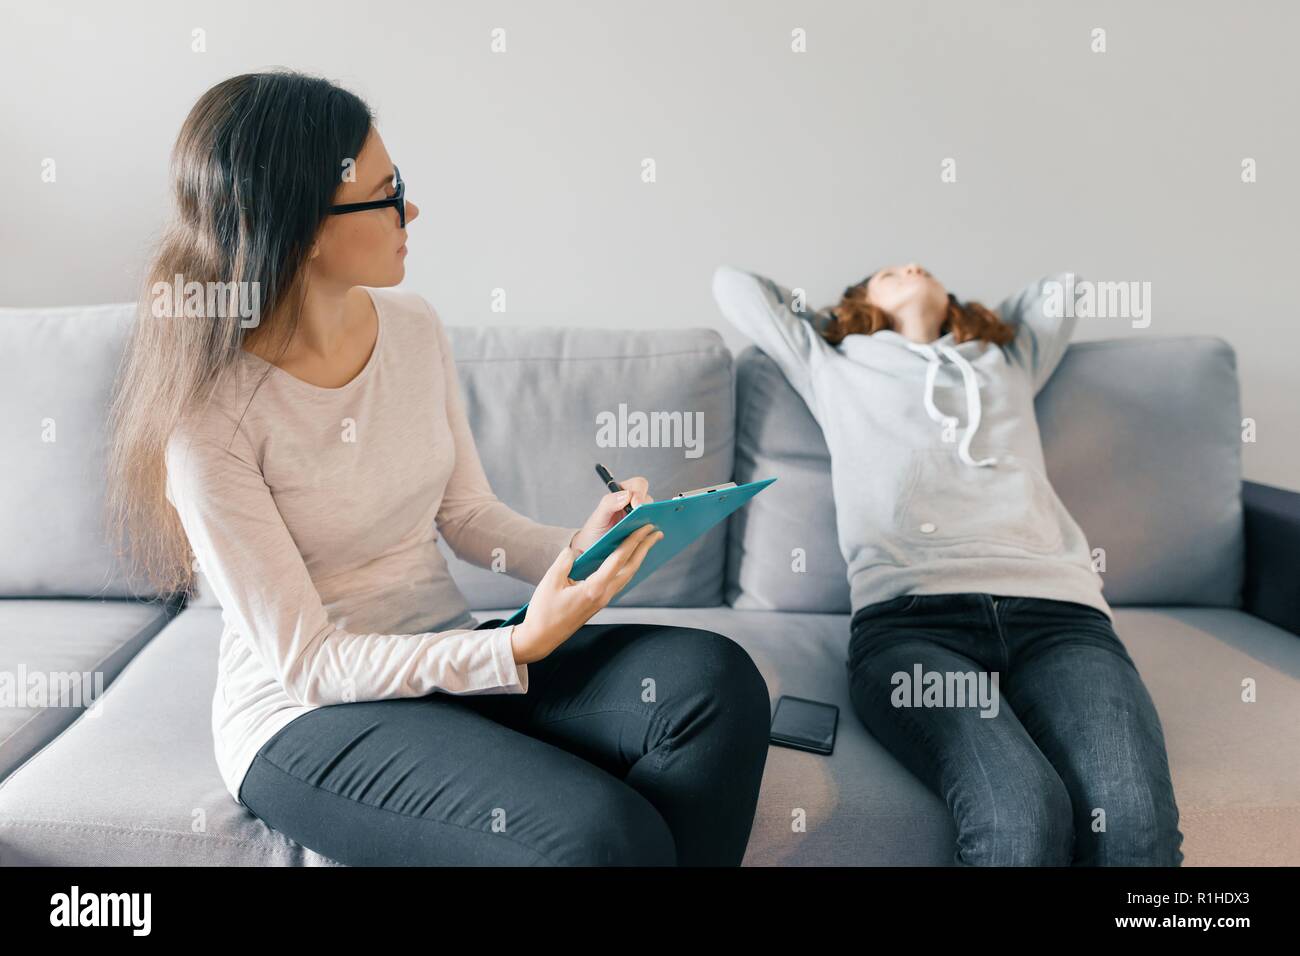 Professional child psychologist talking with teenager girl in office, girl sitting on the sofa. Stock Photo